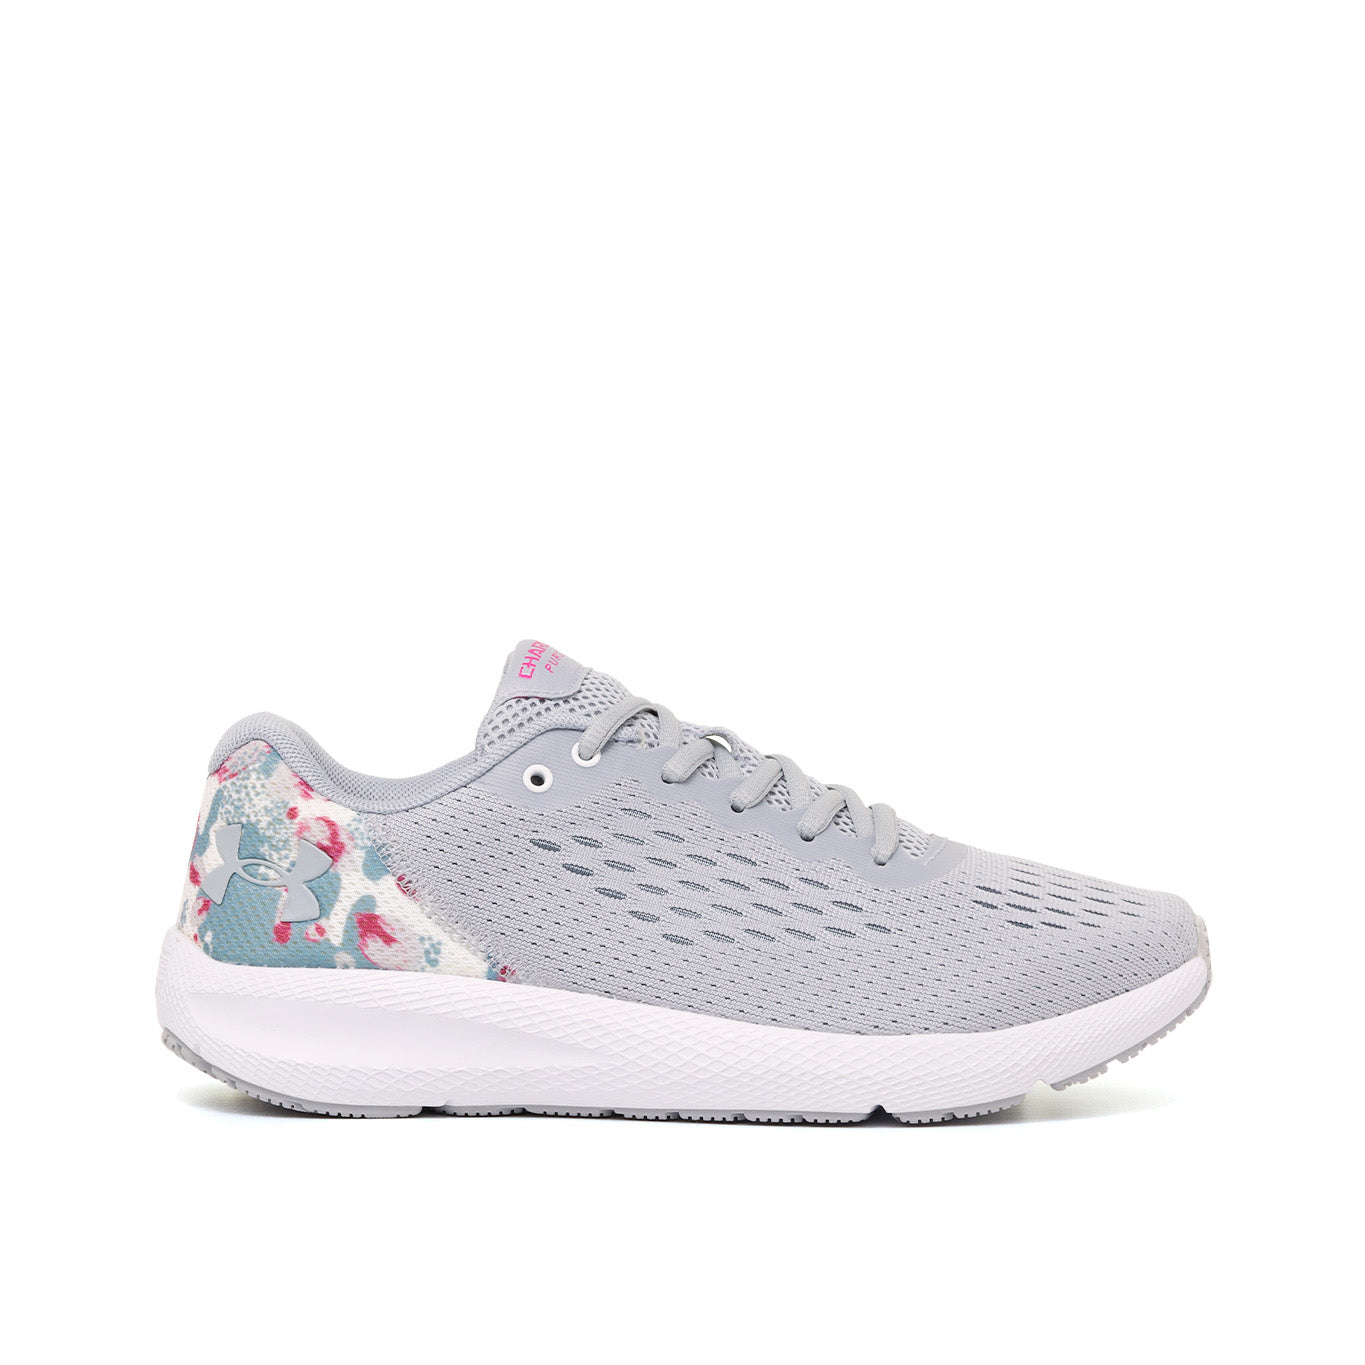 Tenis para correr Under Armour Charged Pursuit 2 de mujer